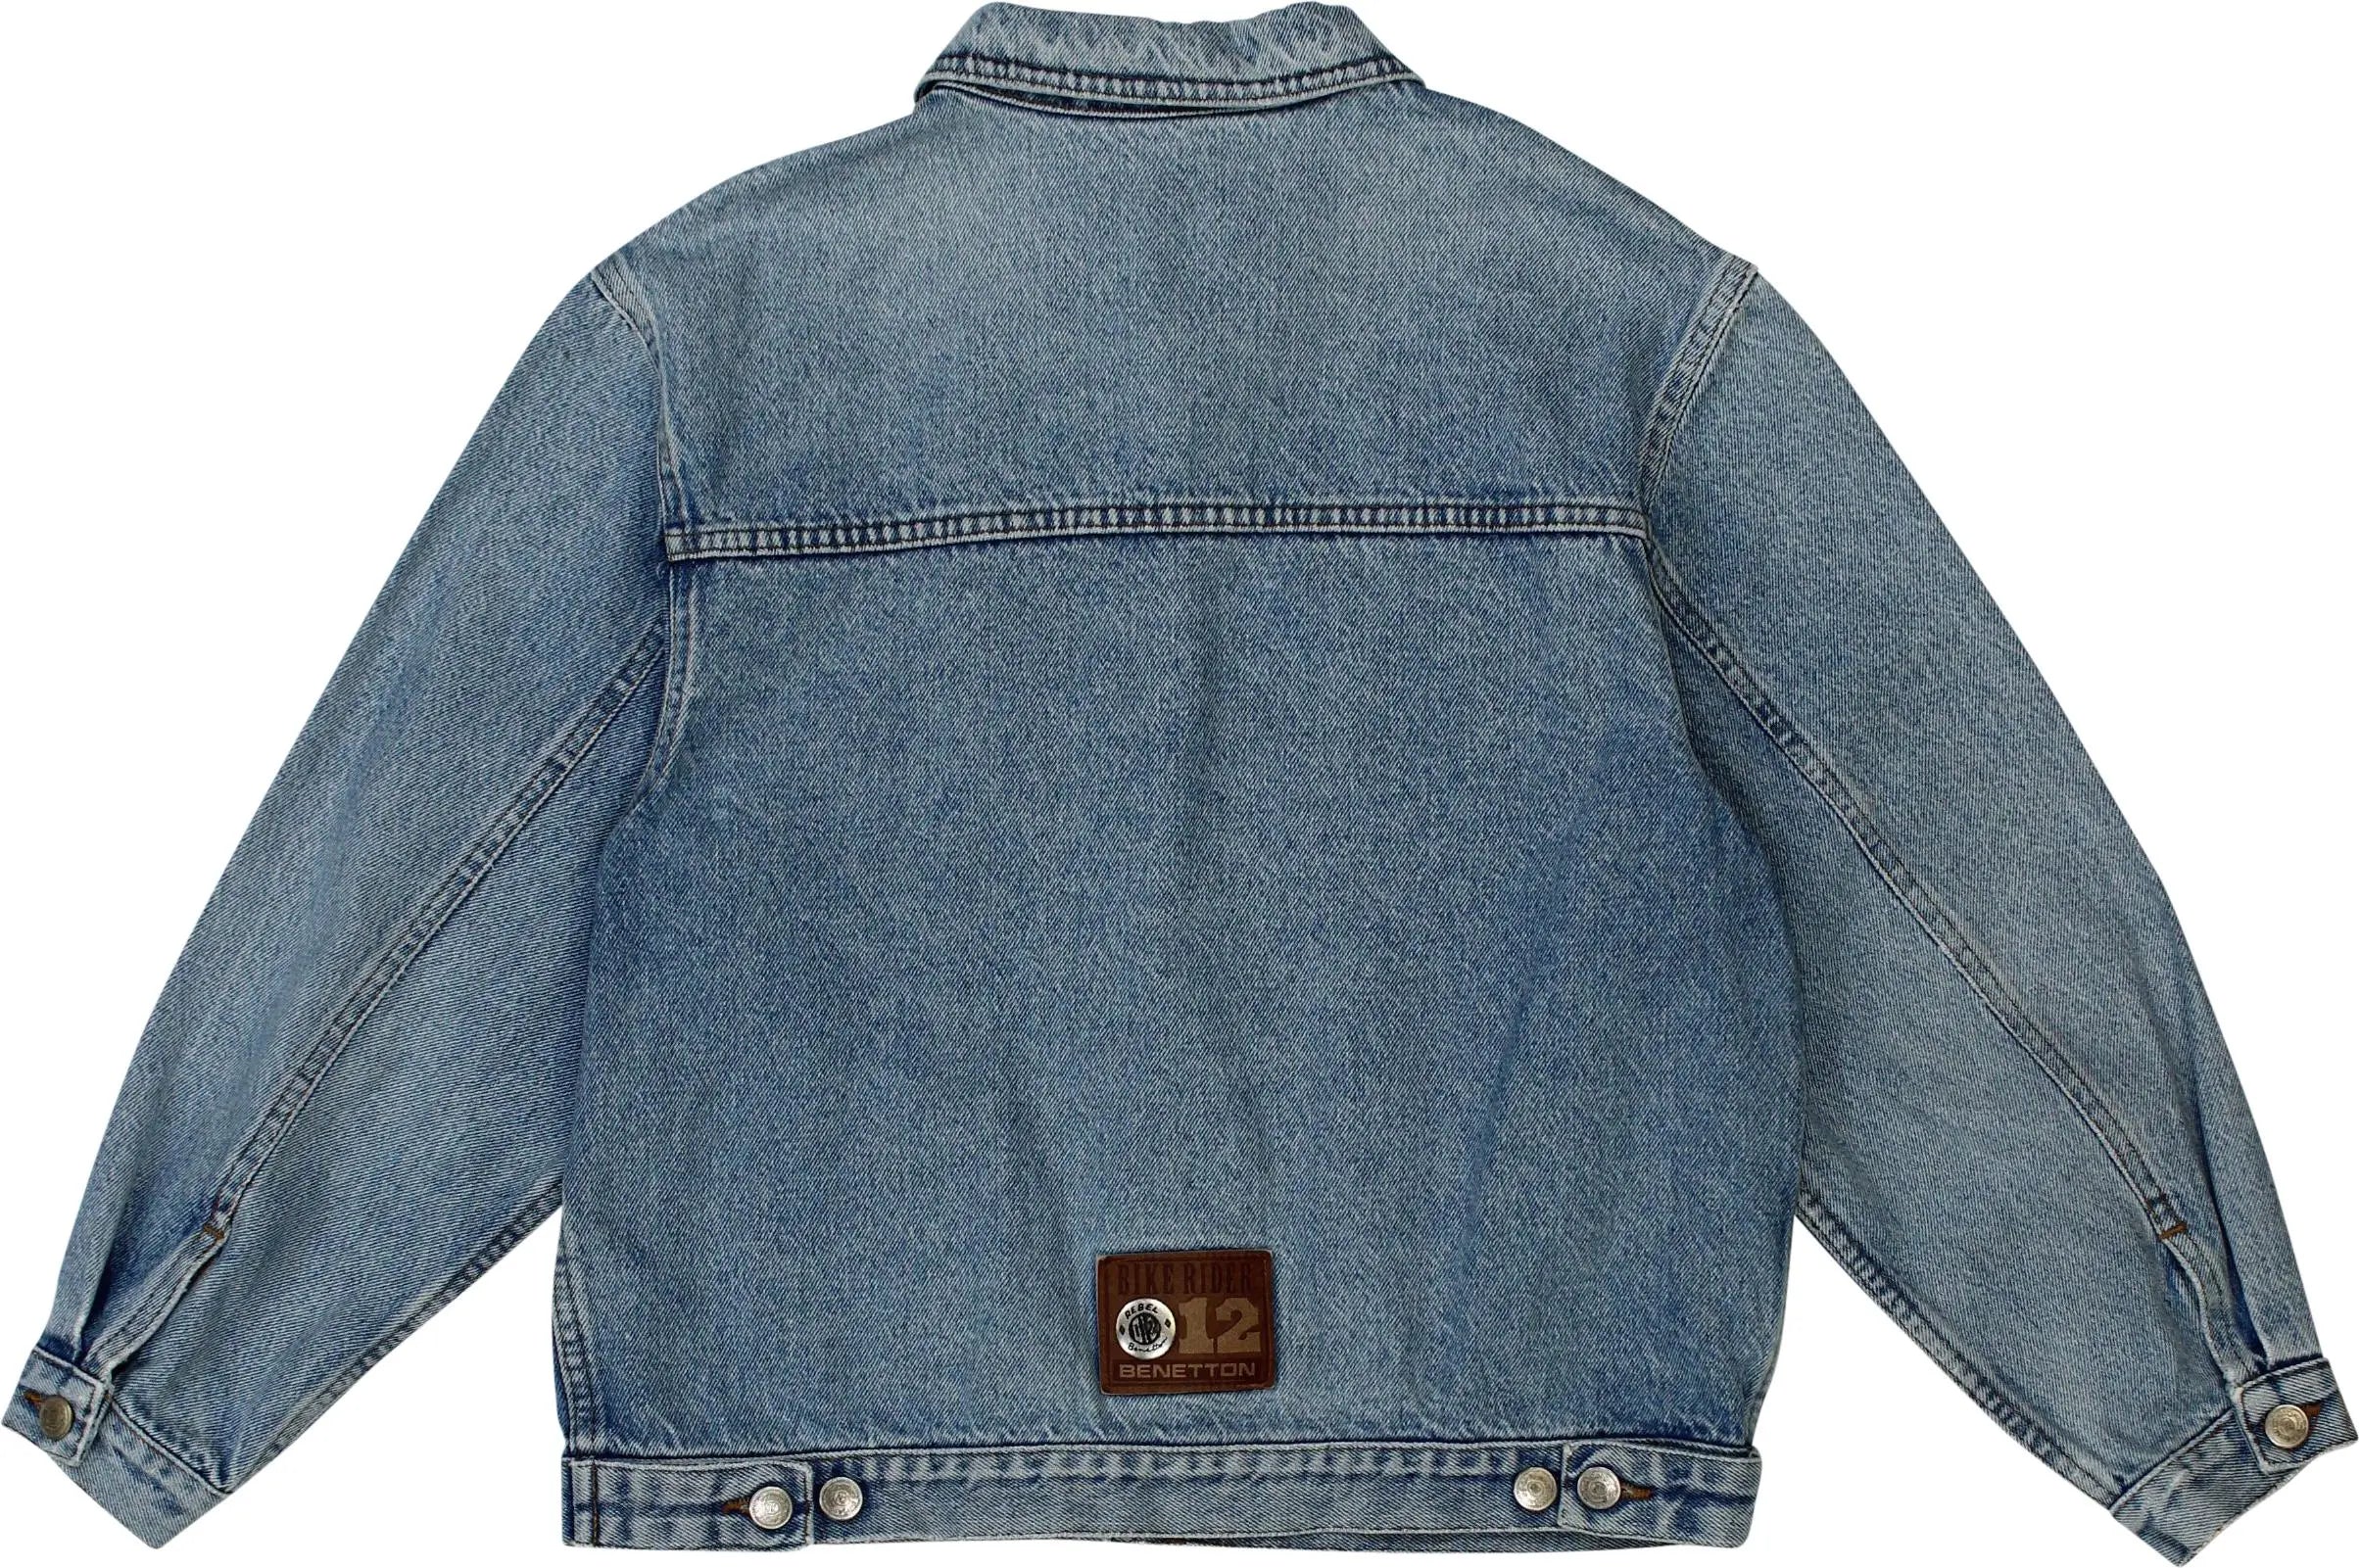 United Colors of Benetton - Denim Jacket by United Colors of Benetton- ThriftTale.com - Vintage and second handclothing